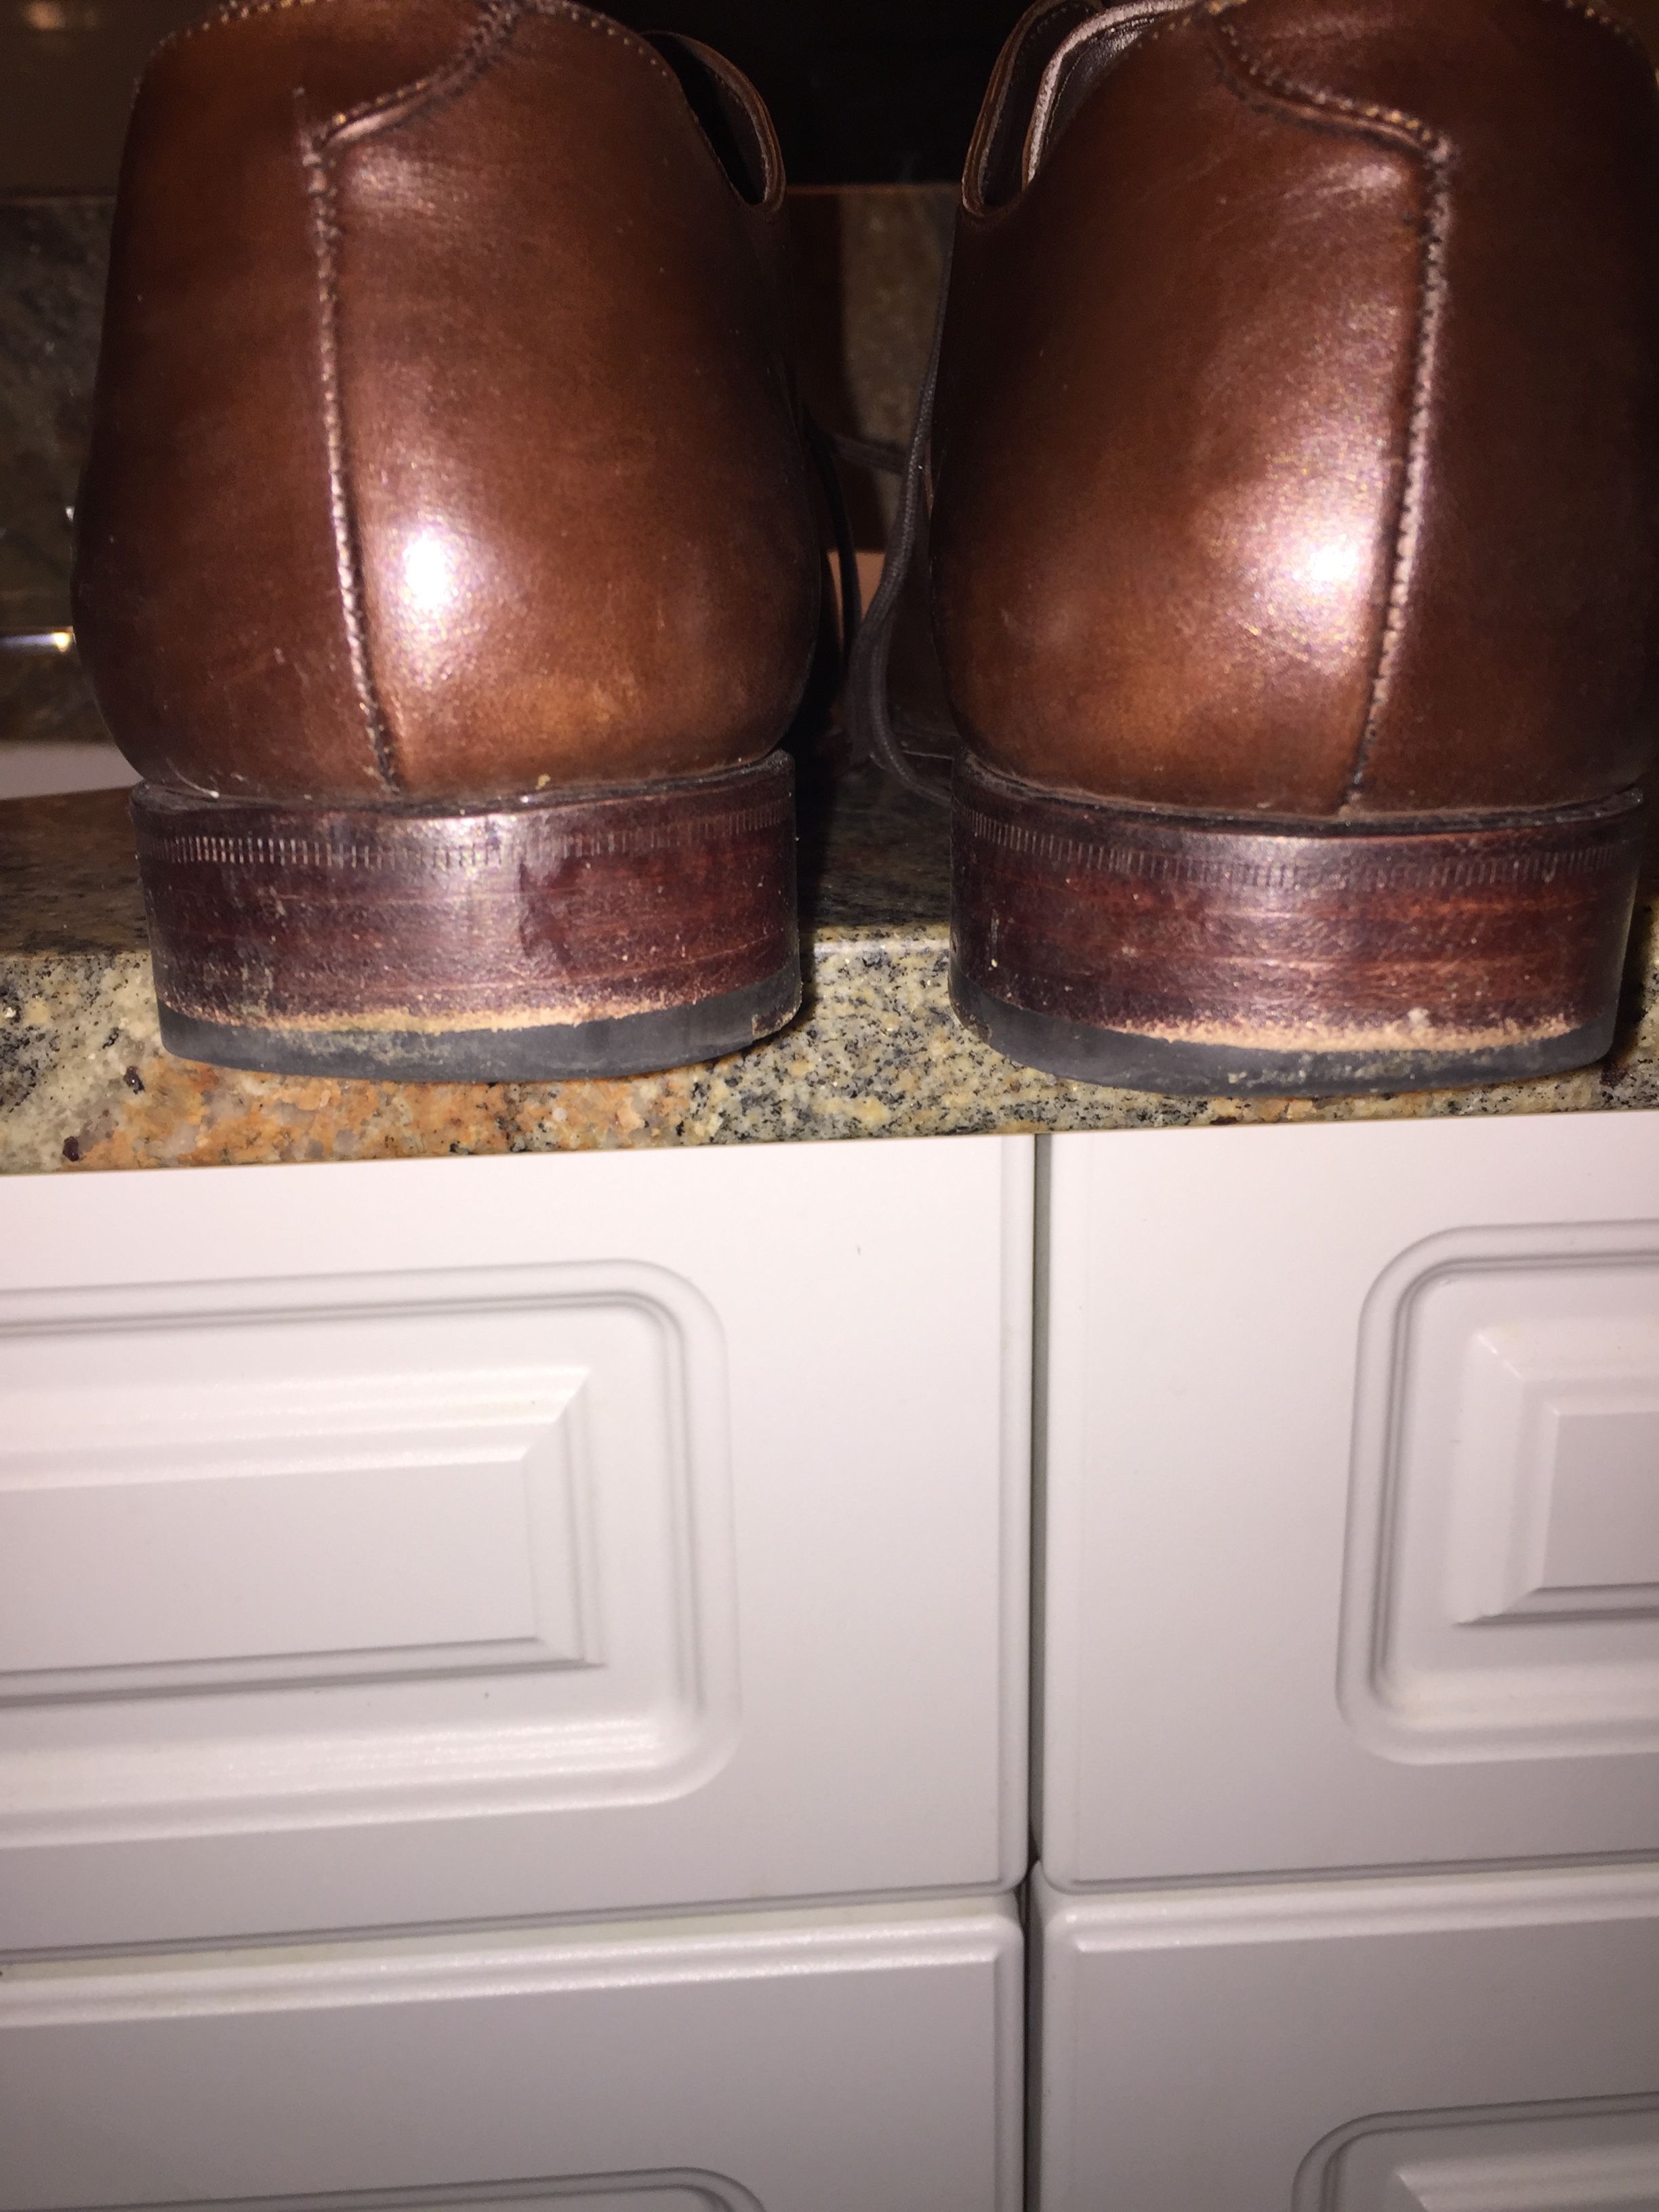 How do I fix the discoloration in the heel of my shoes? | Styleforum